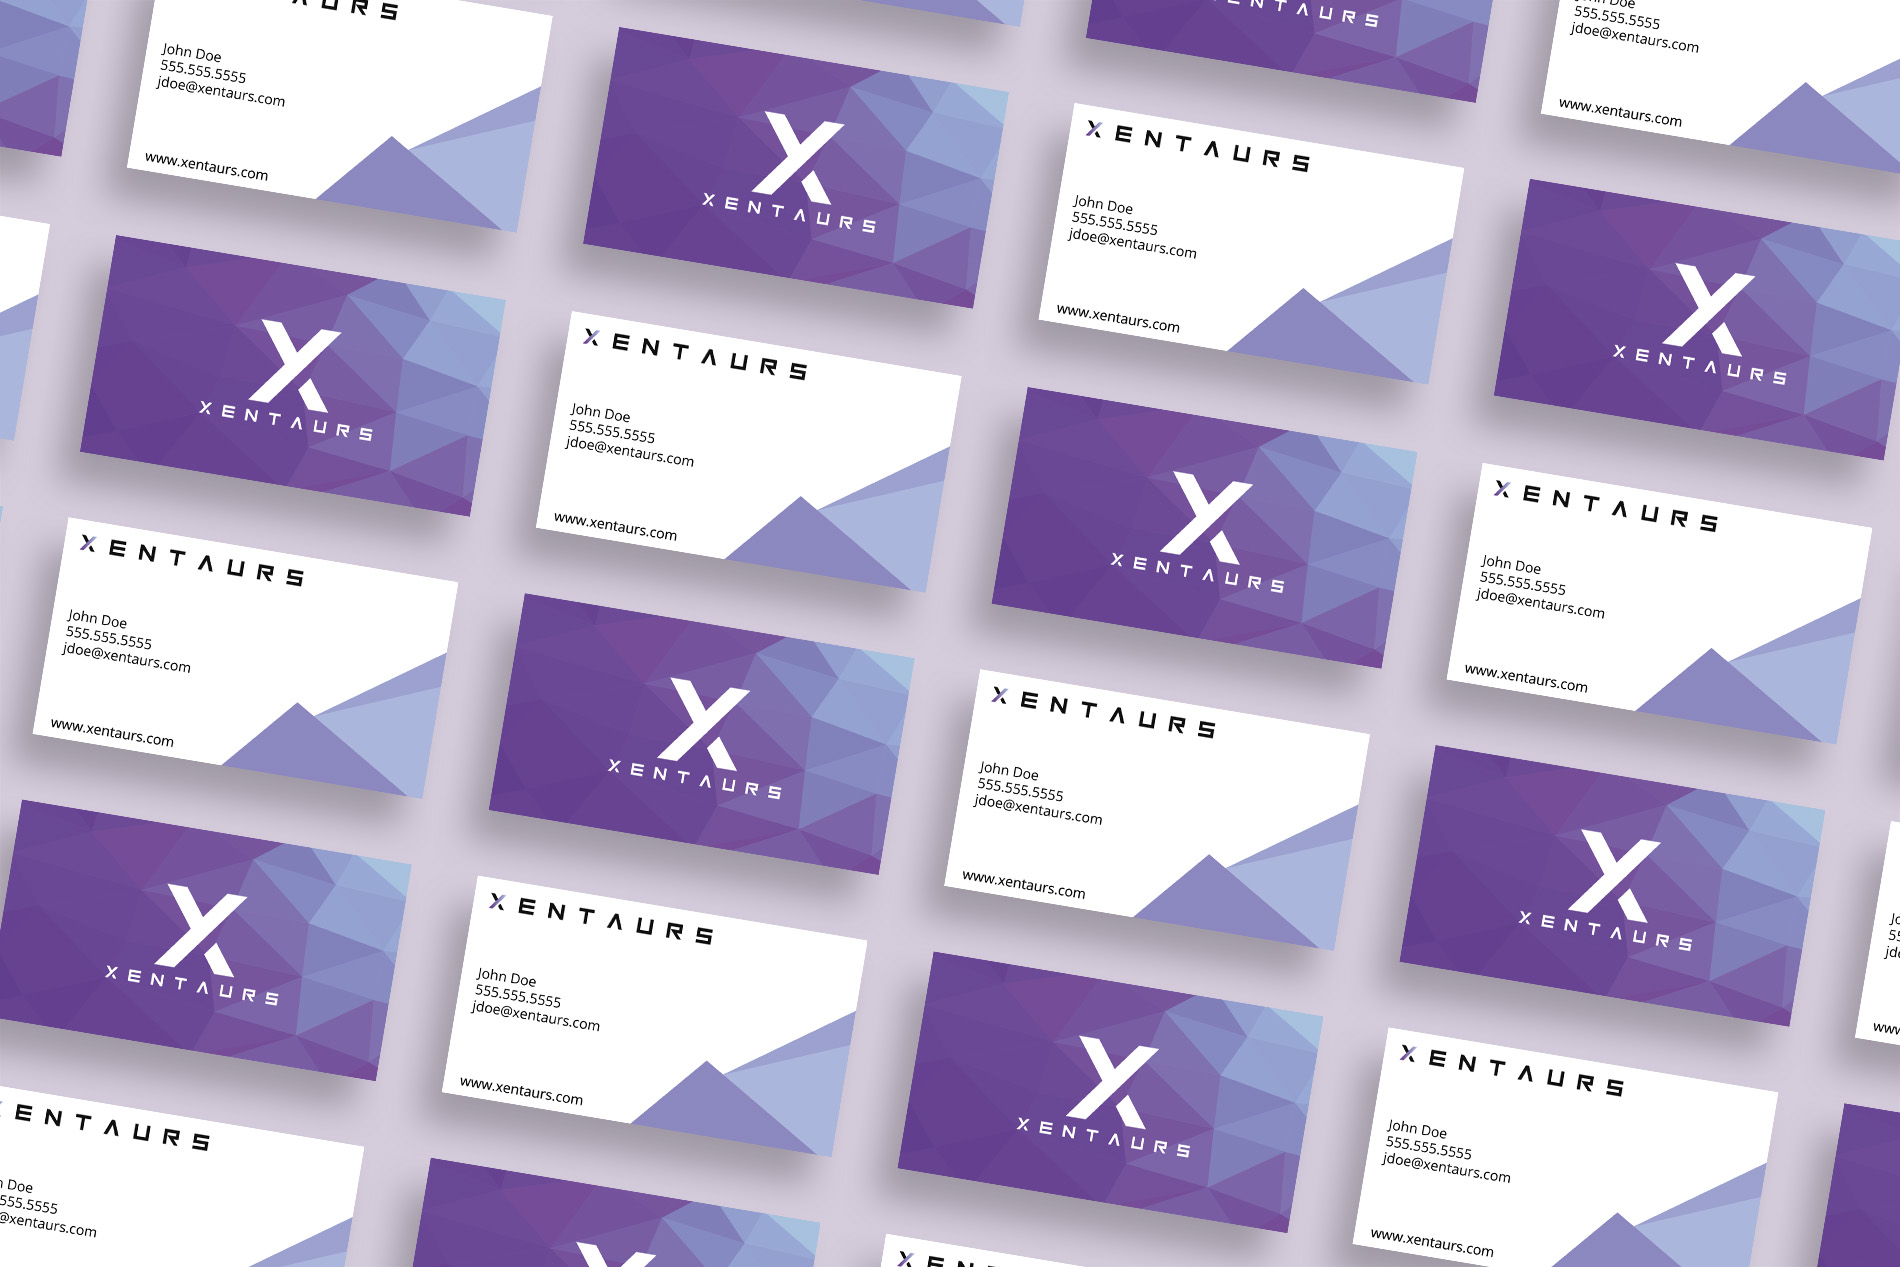 Xentaurs - Business Cards